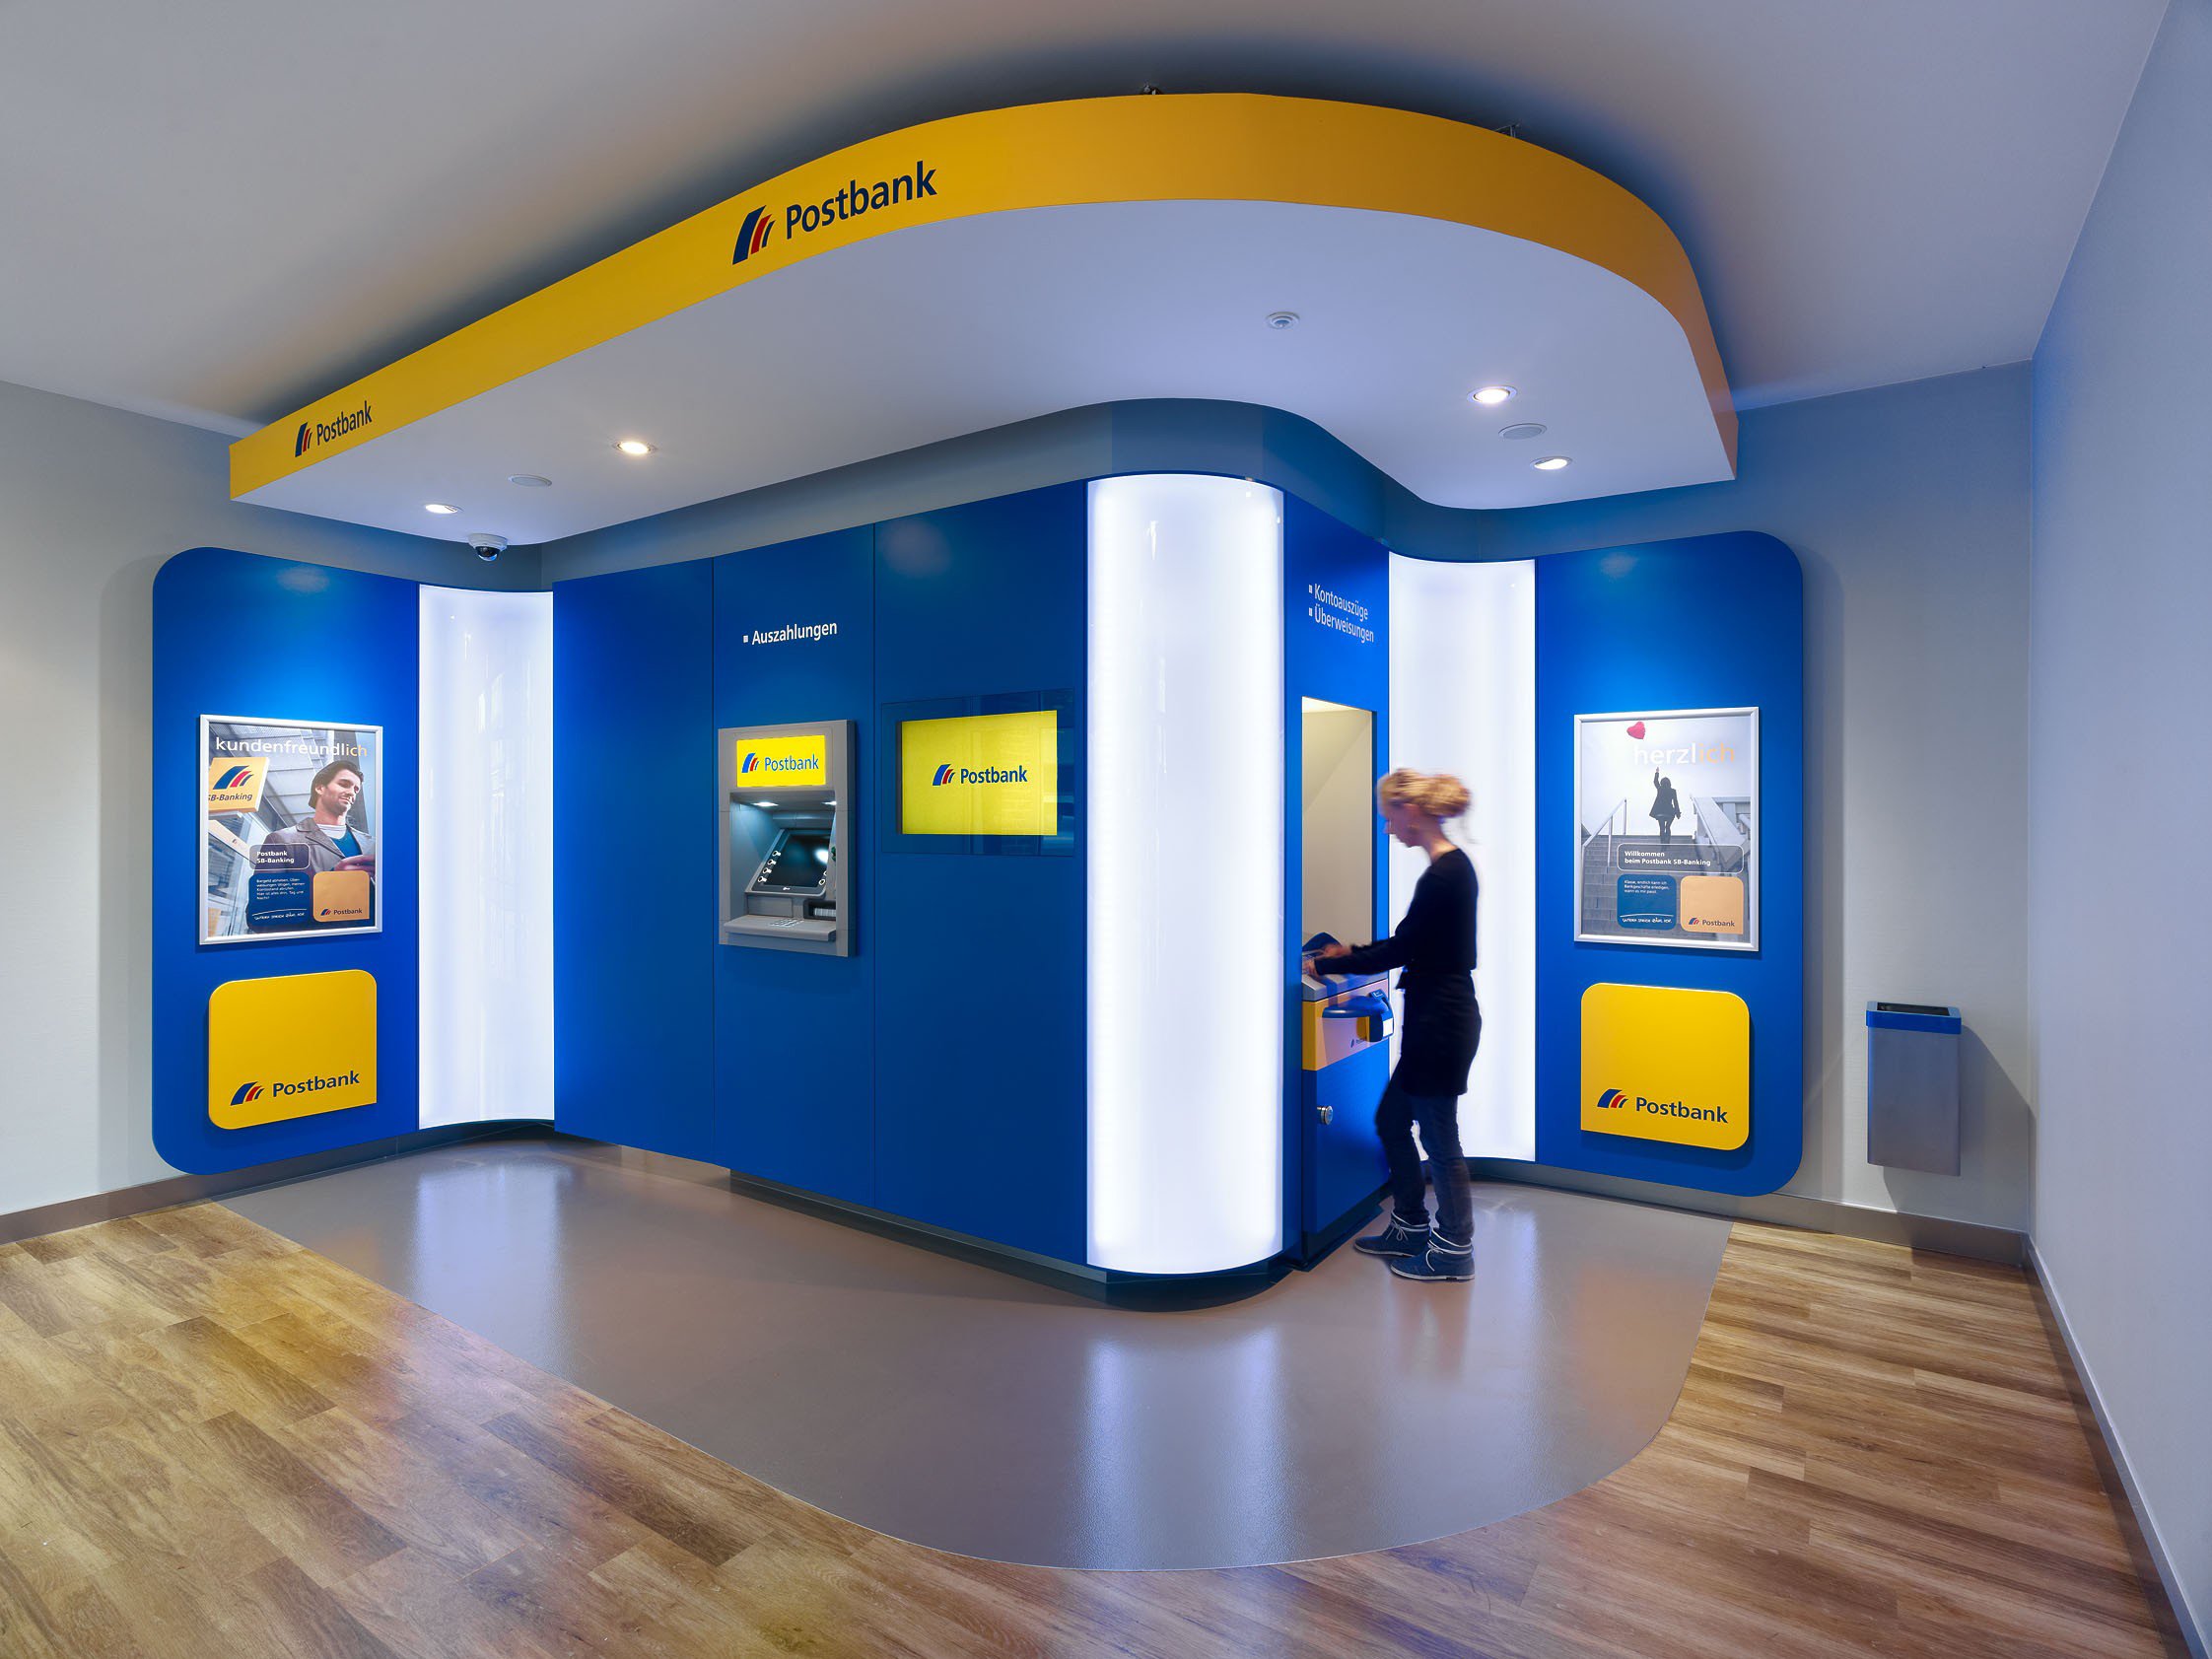 Postbank In Germany Account Opening Good Or Bad